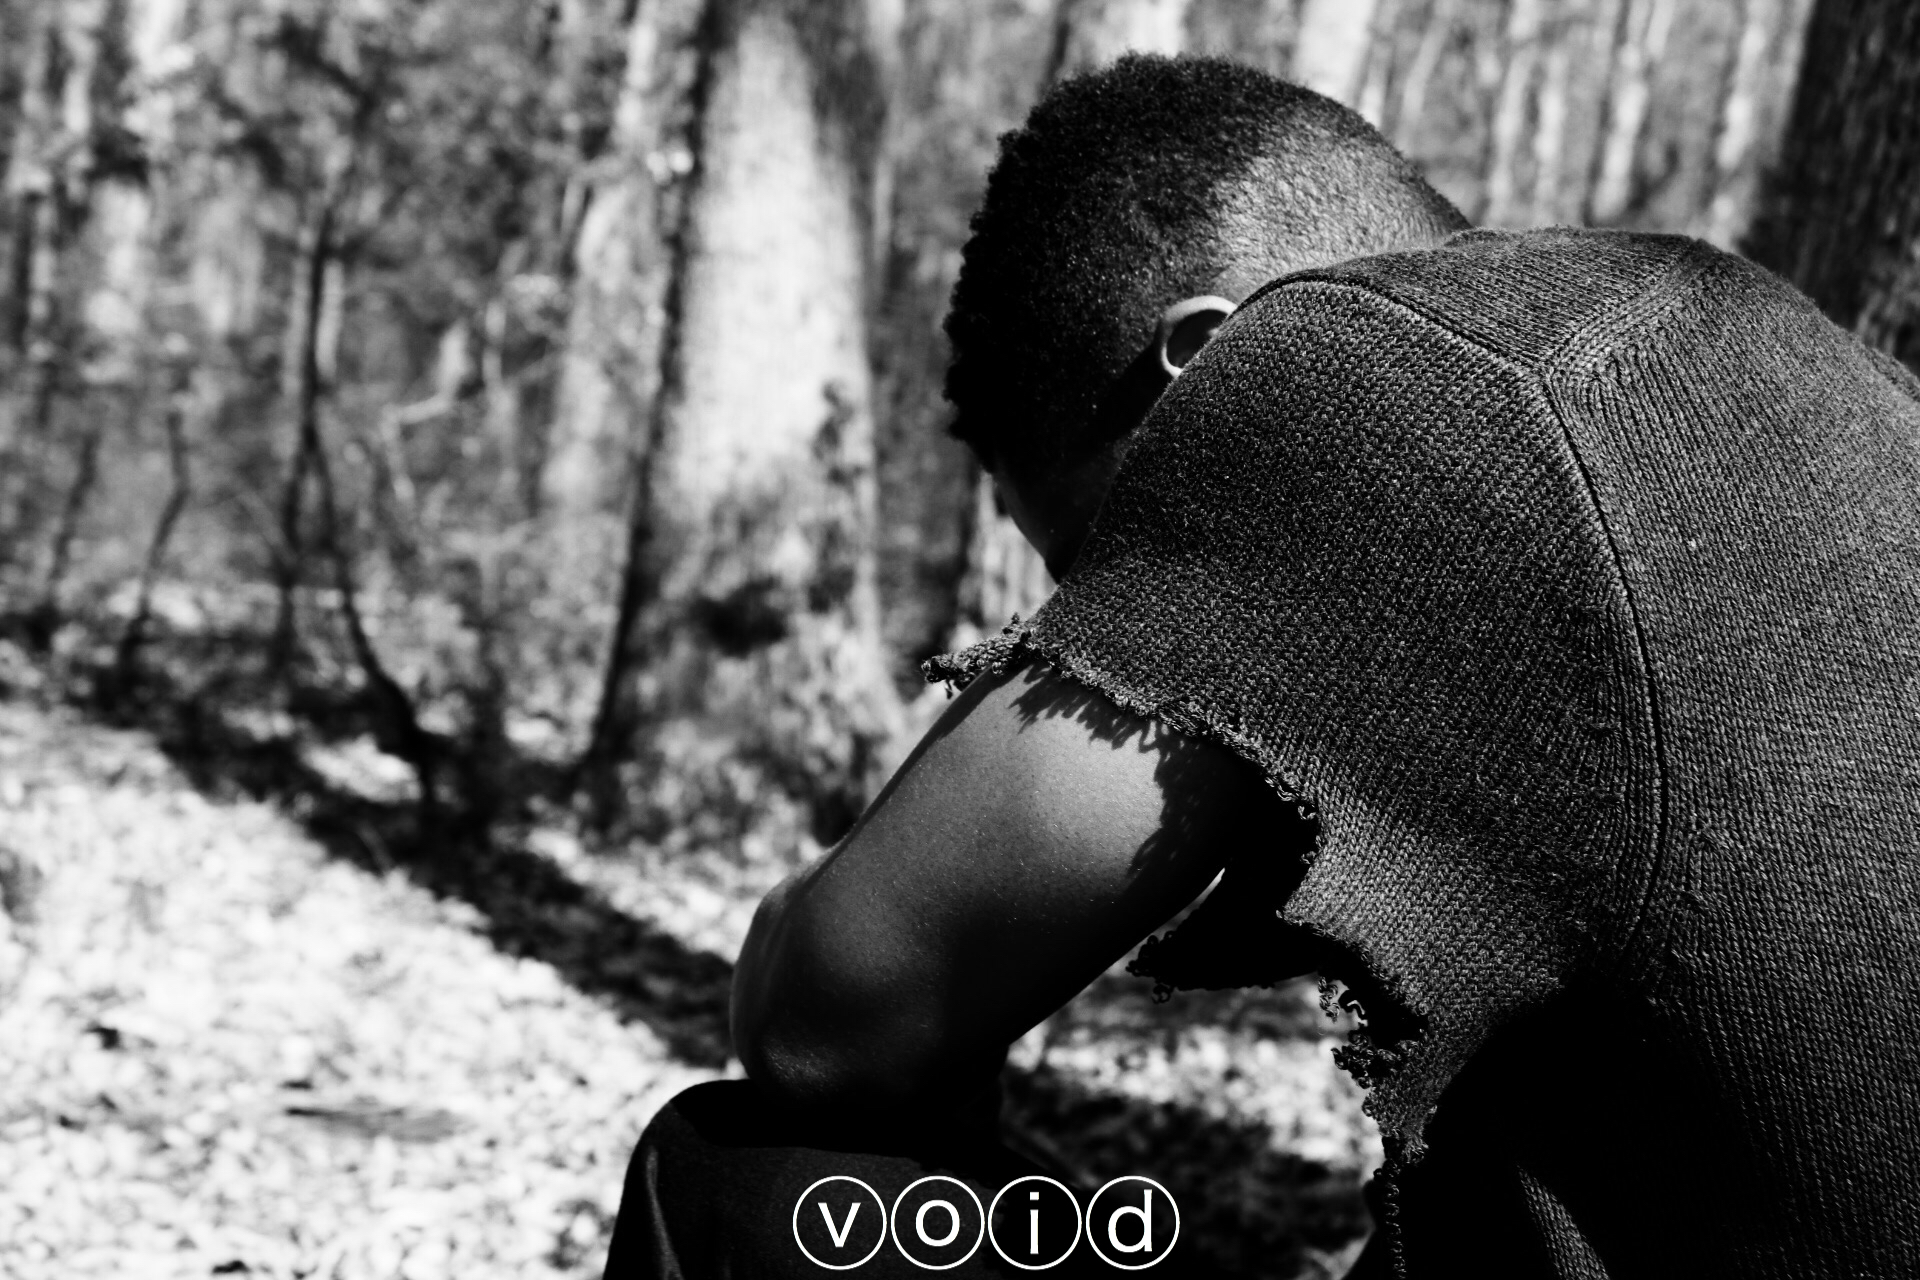 Void-Photography-For-Fashion-Gxd-Magazine-2.jpg